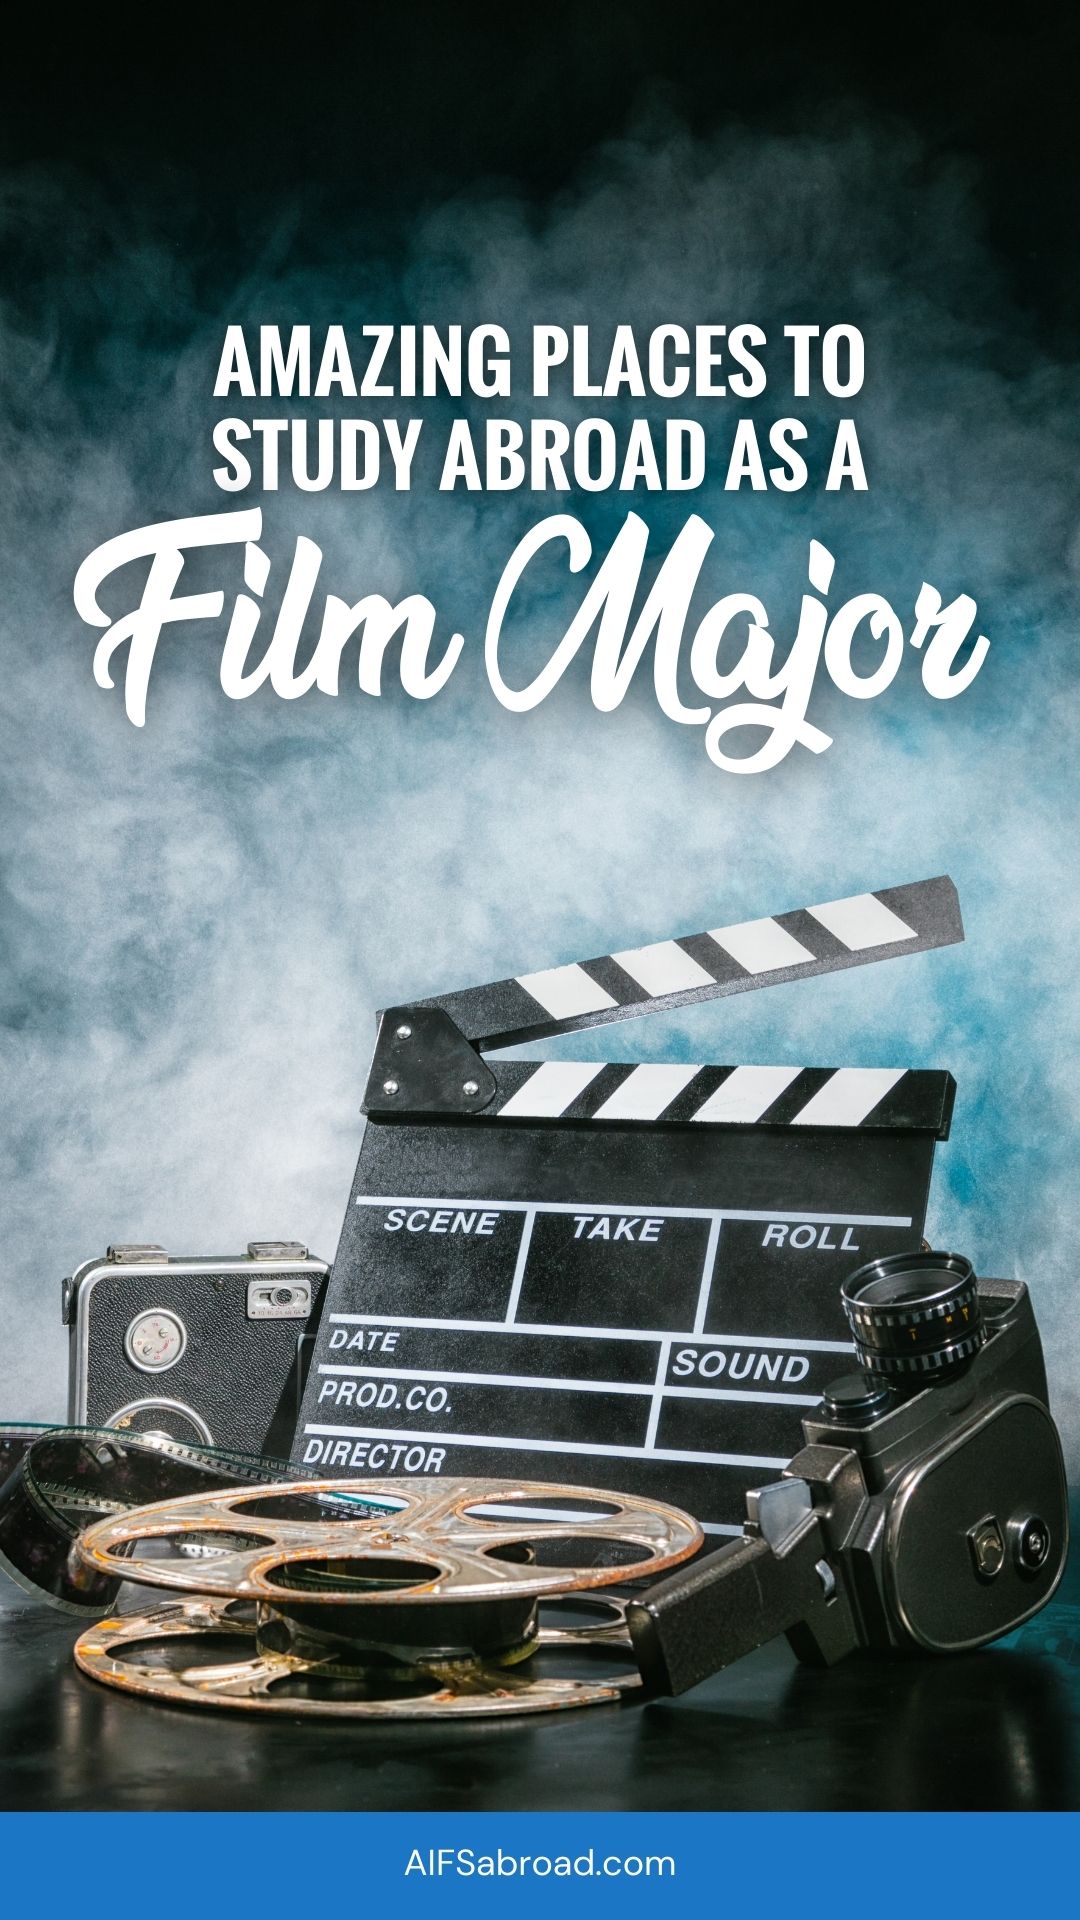 Pin image: Film paraphernalia with text "Amazing Places to Study Abroad as a Film Major"